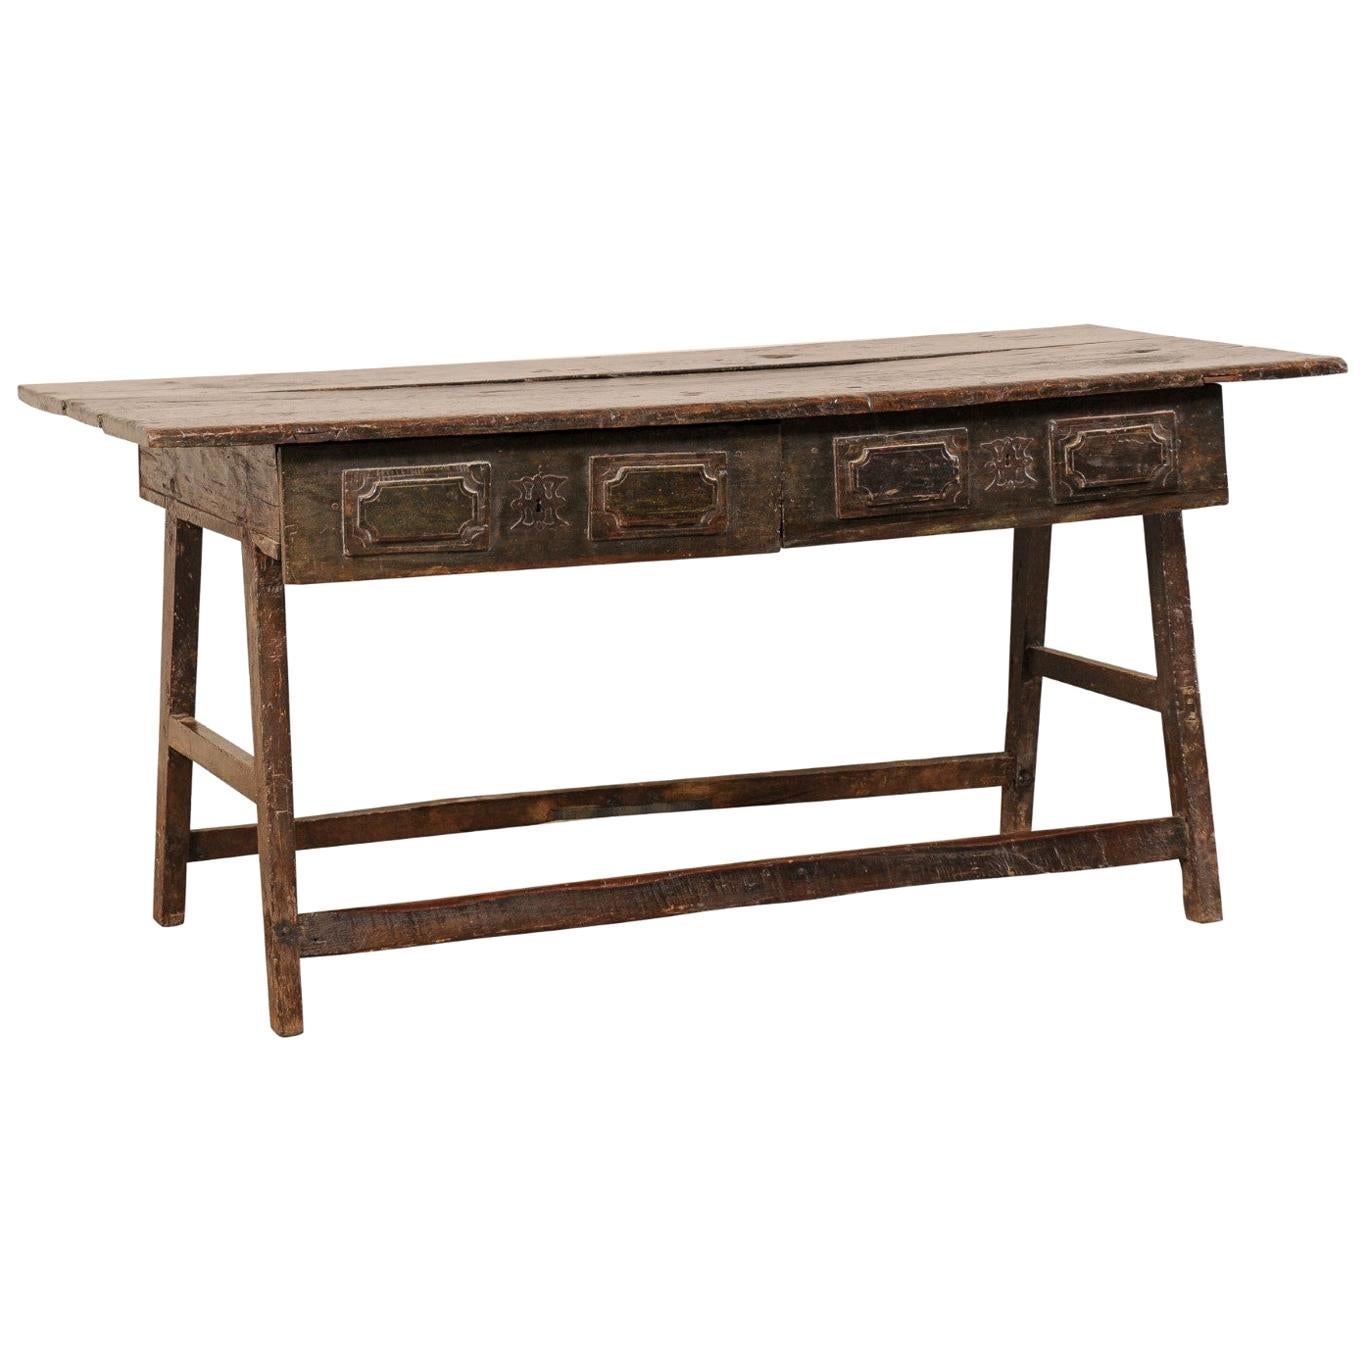 Late 17th C. Brazilian Peroba Wood Console Table w/Drawers & Sawhorse Style Legs